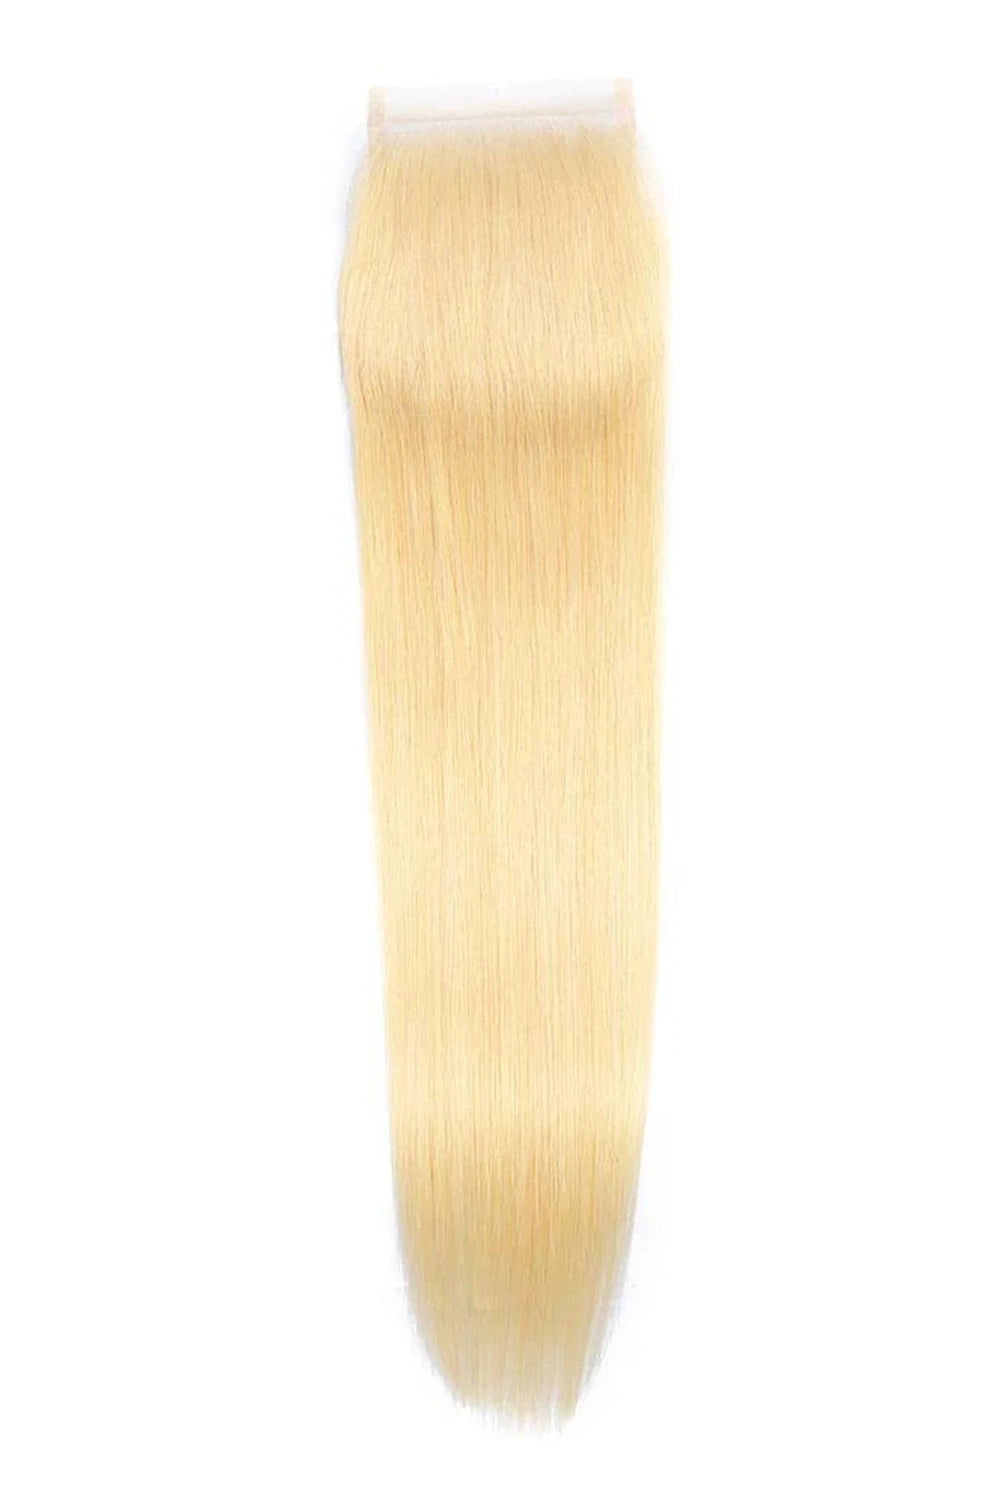 5x5-blonde-hd-lace-closure-straight-virgin-hair-for-wig-making-1